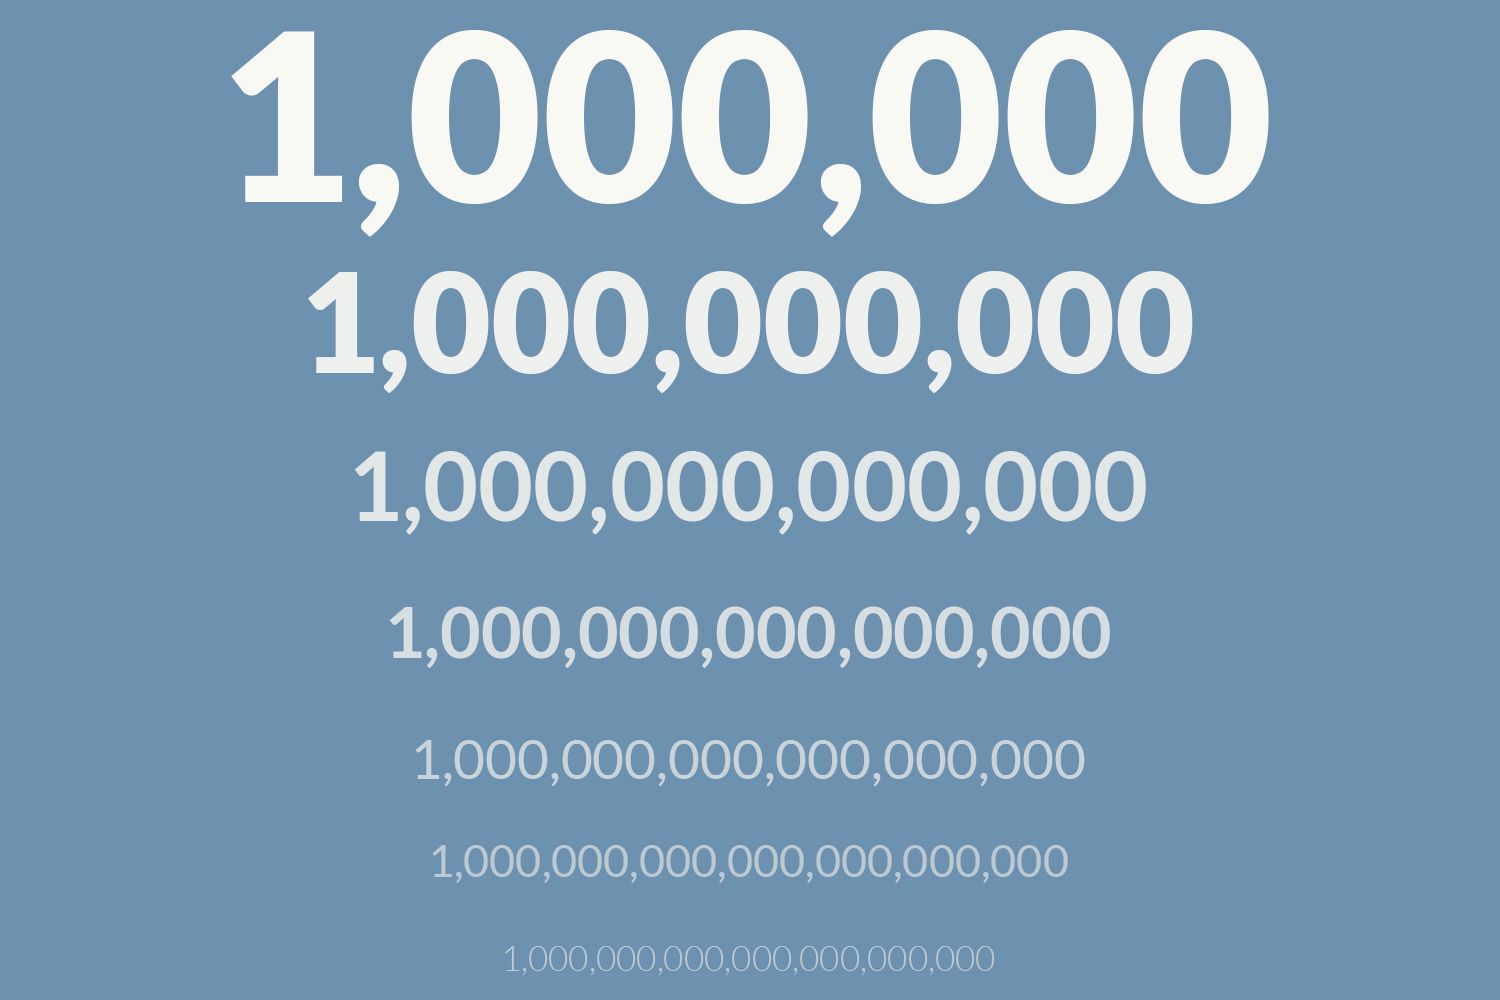 How Many Zeros Are in a Million, Billion, and Trillion